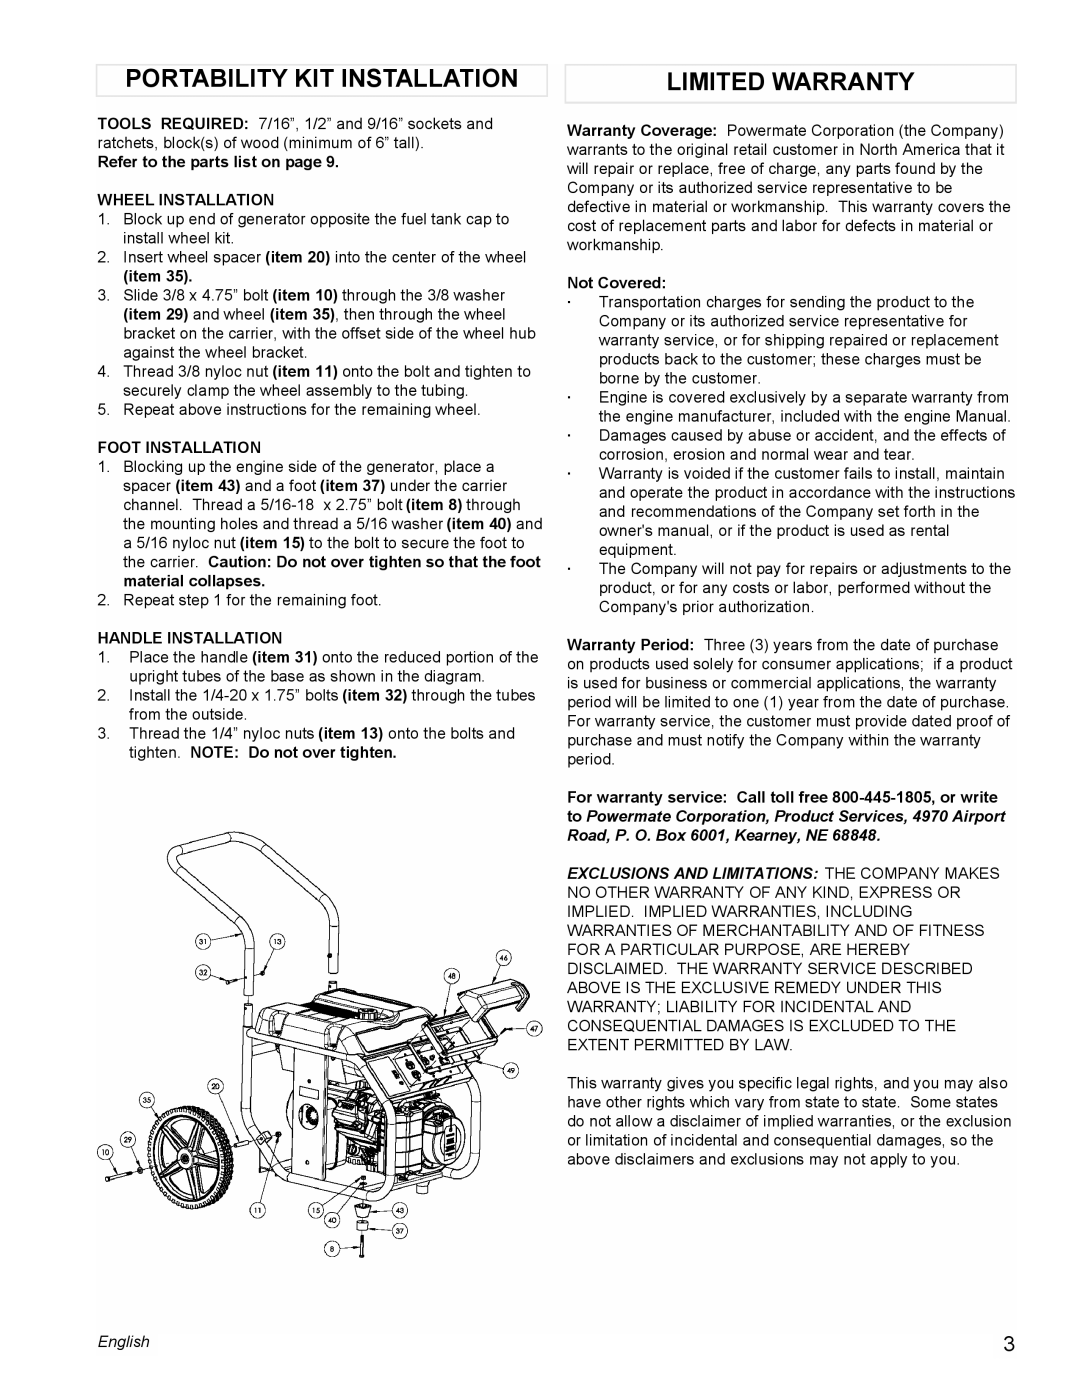 Powermate PM0675700 Portability Kit Installation, Limited Warranty, Refer to the parts list on page, Wheel Installation 